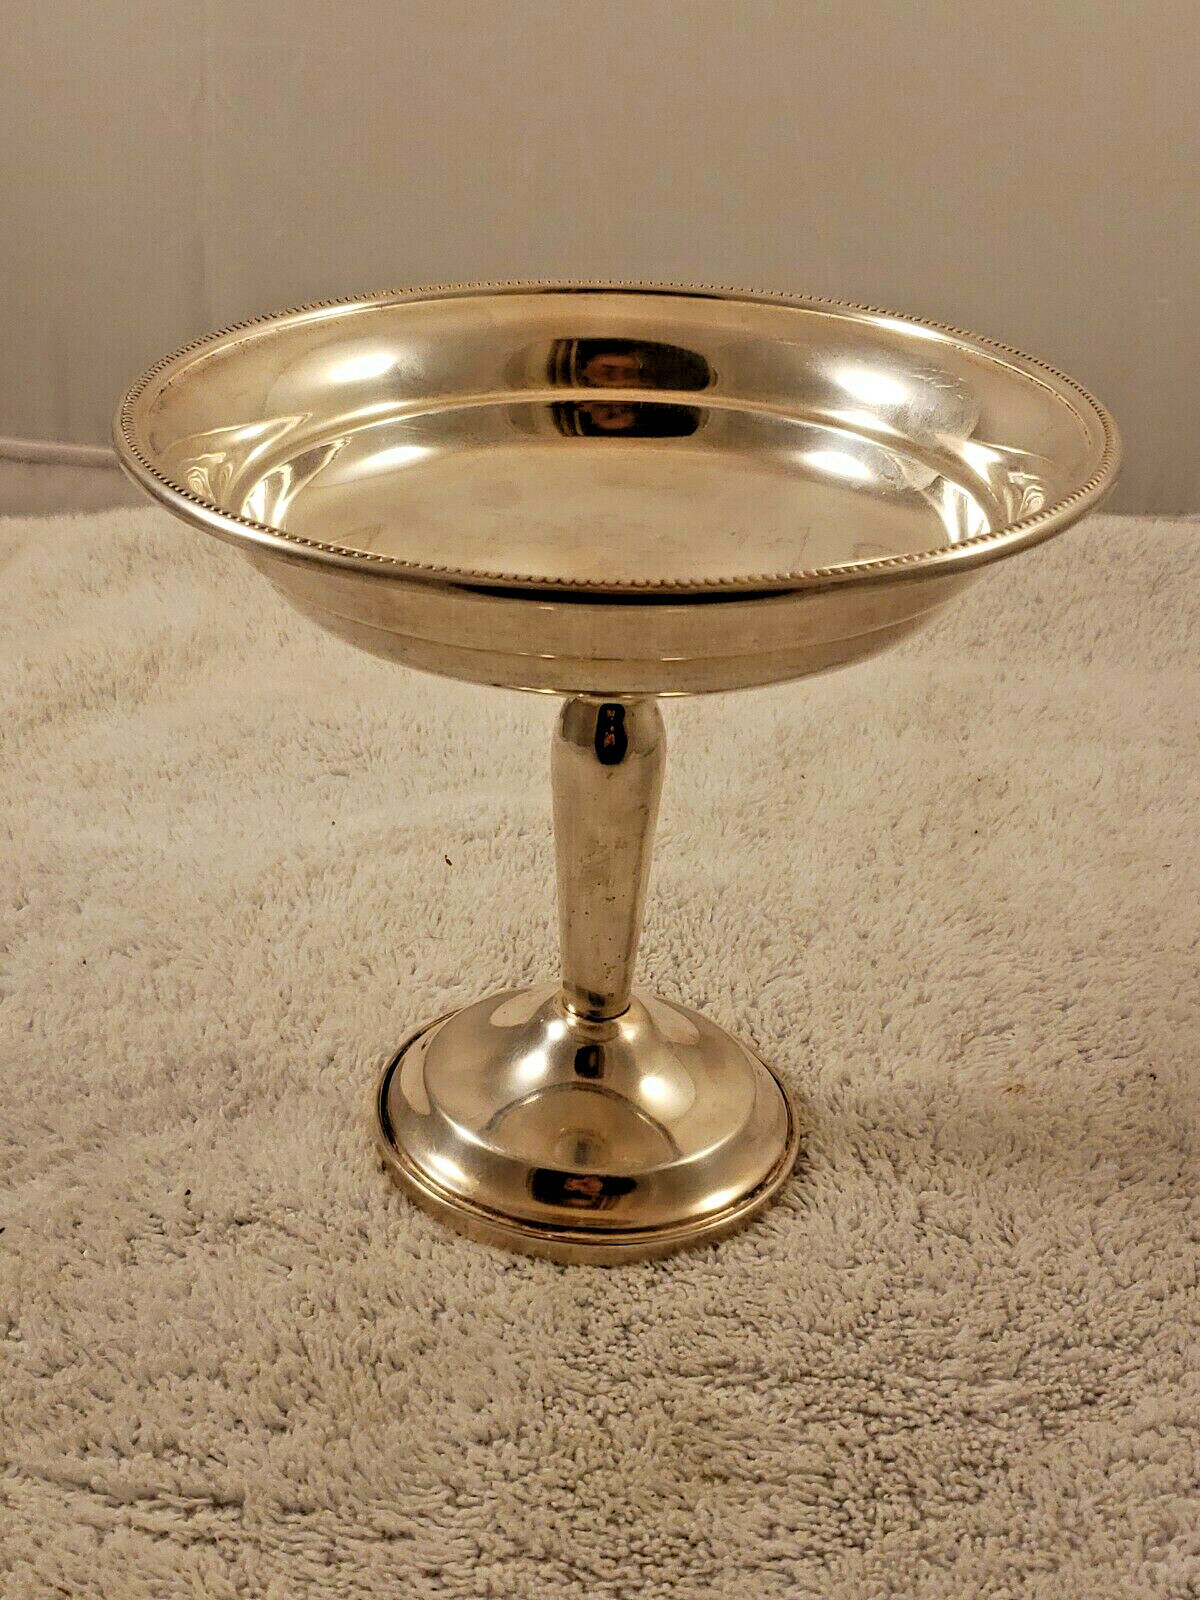 2021 spring and summer new VINTAGE REVERE San Diego Mall SILVERSMITHS STERLING WEIGHTE 700 SILVER COMPOTE